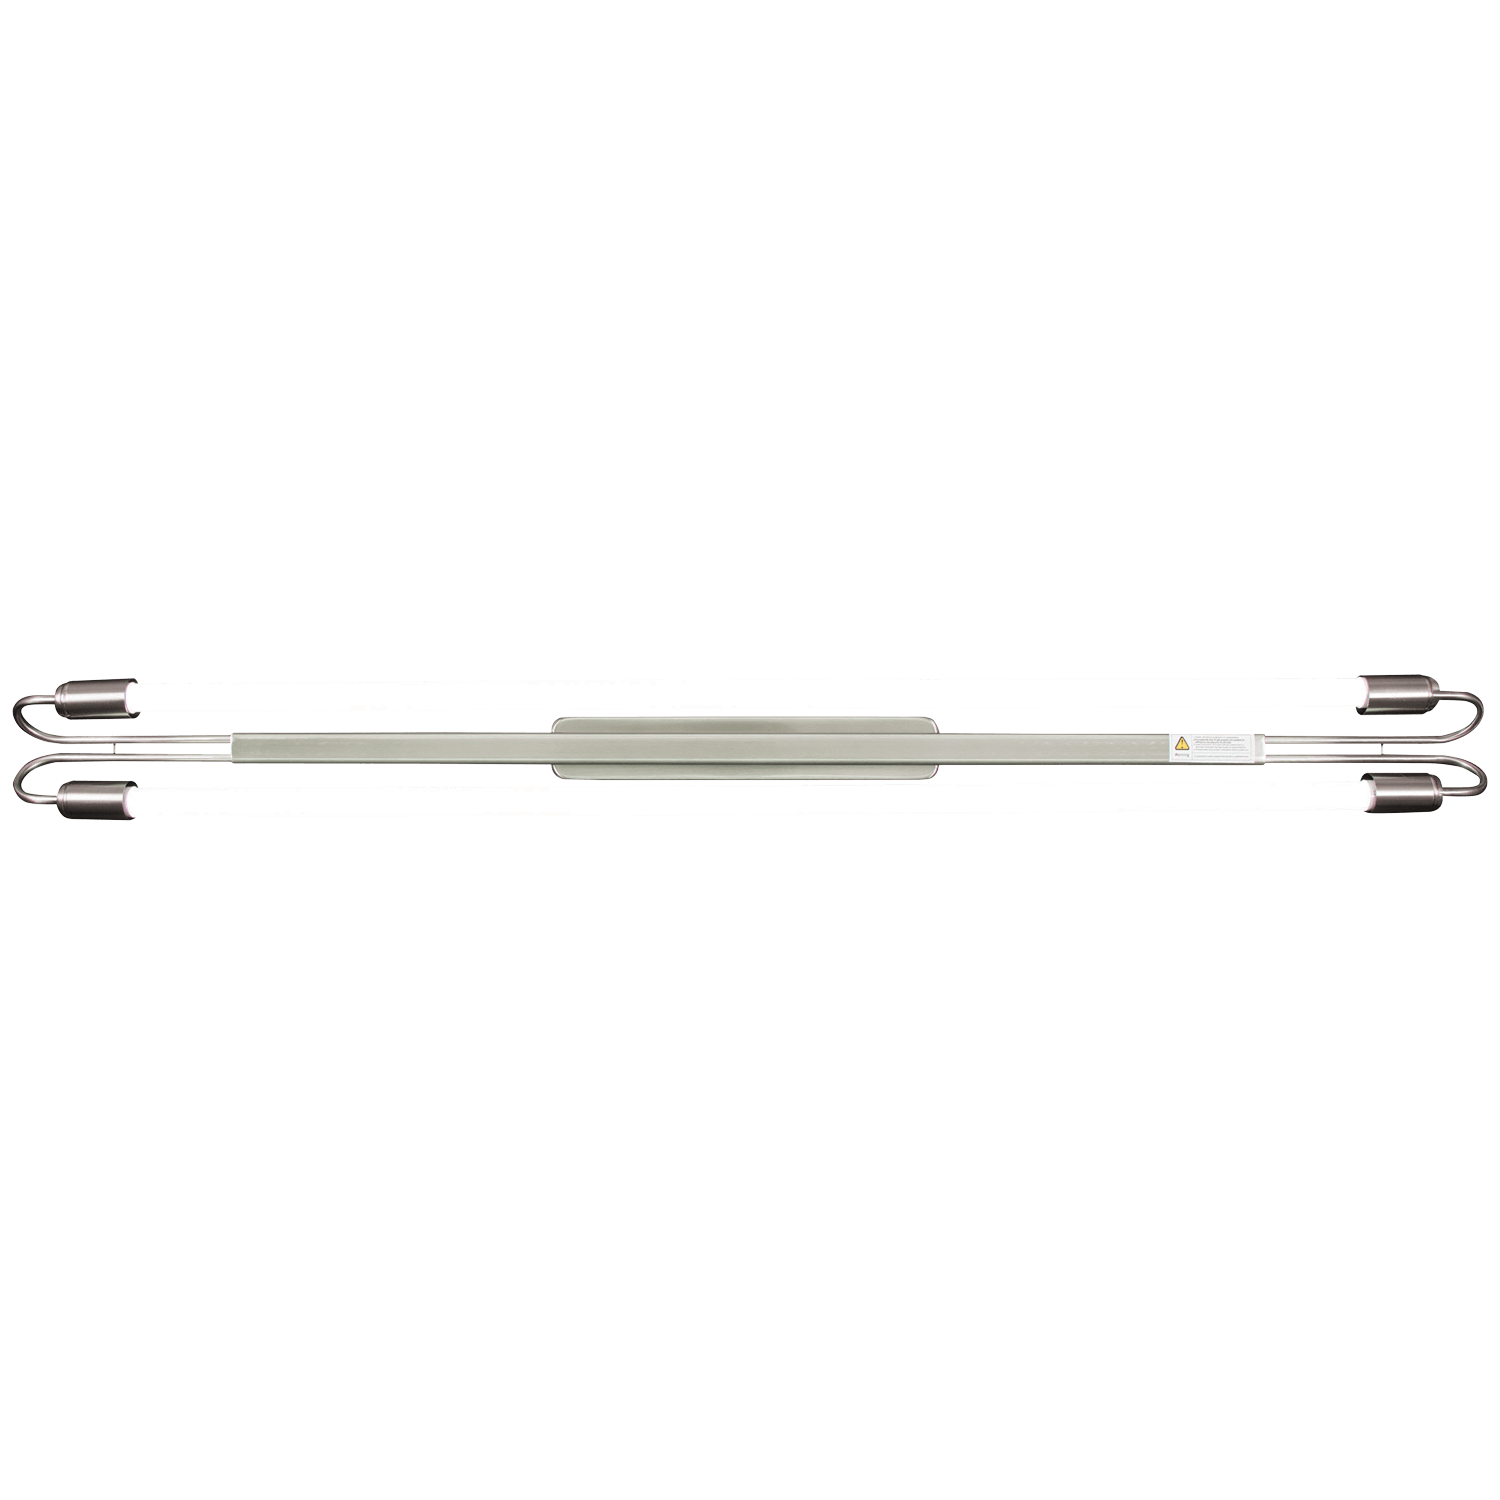 4FT Satin Nickel LED Linear Excluding 2 x 18W T8 LED Globes